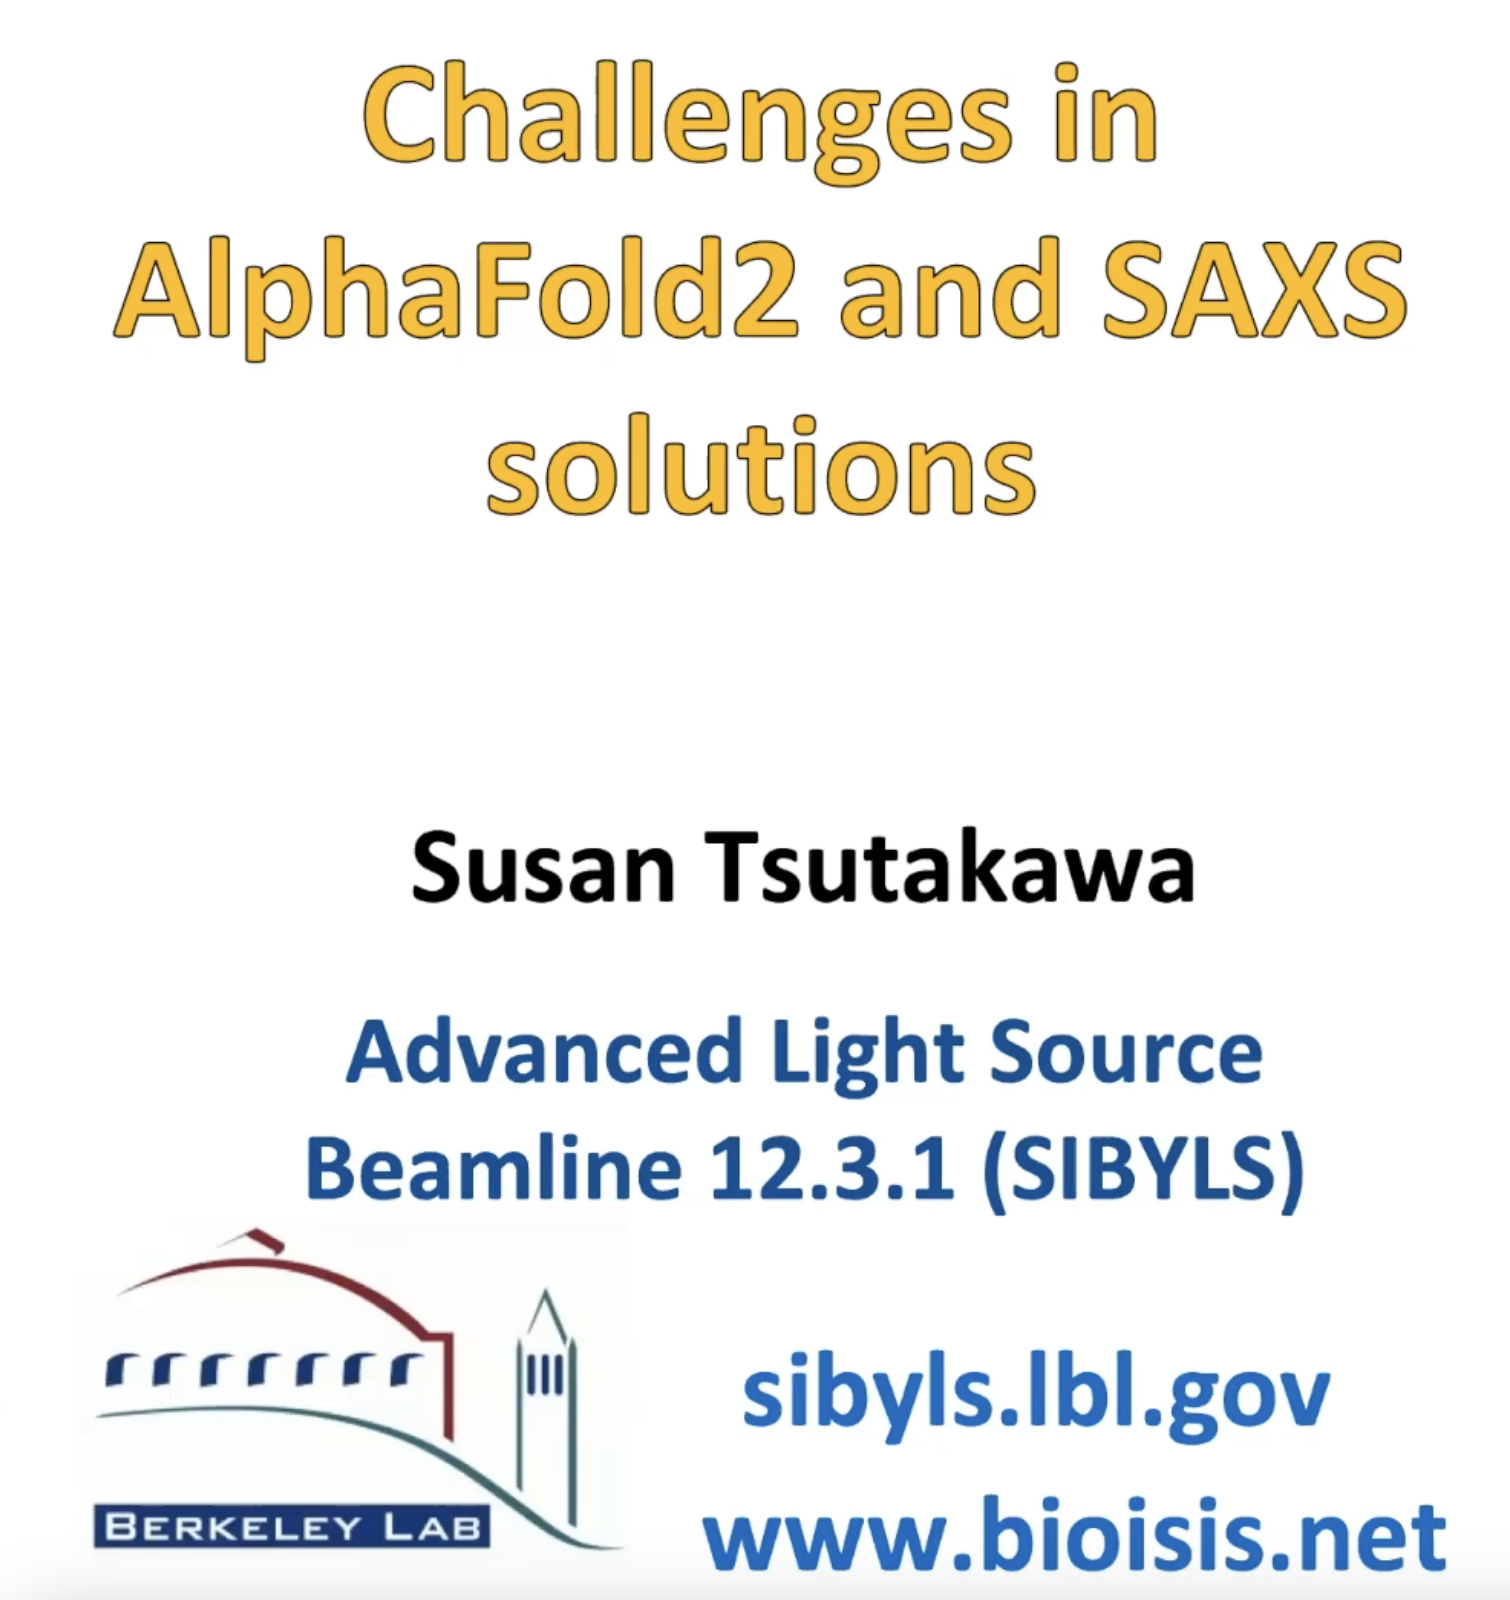 Challenges in AlphaFold2 and SAXS Solutions